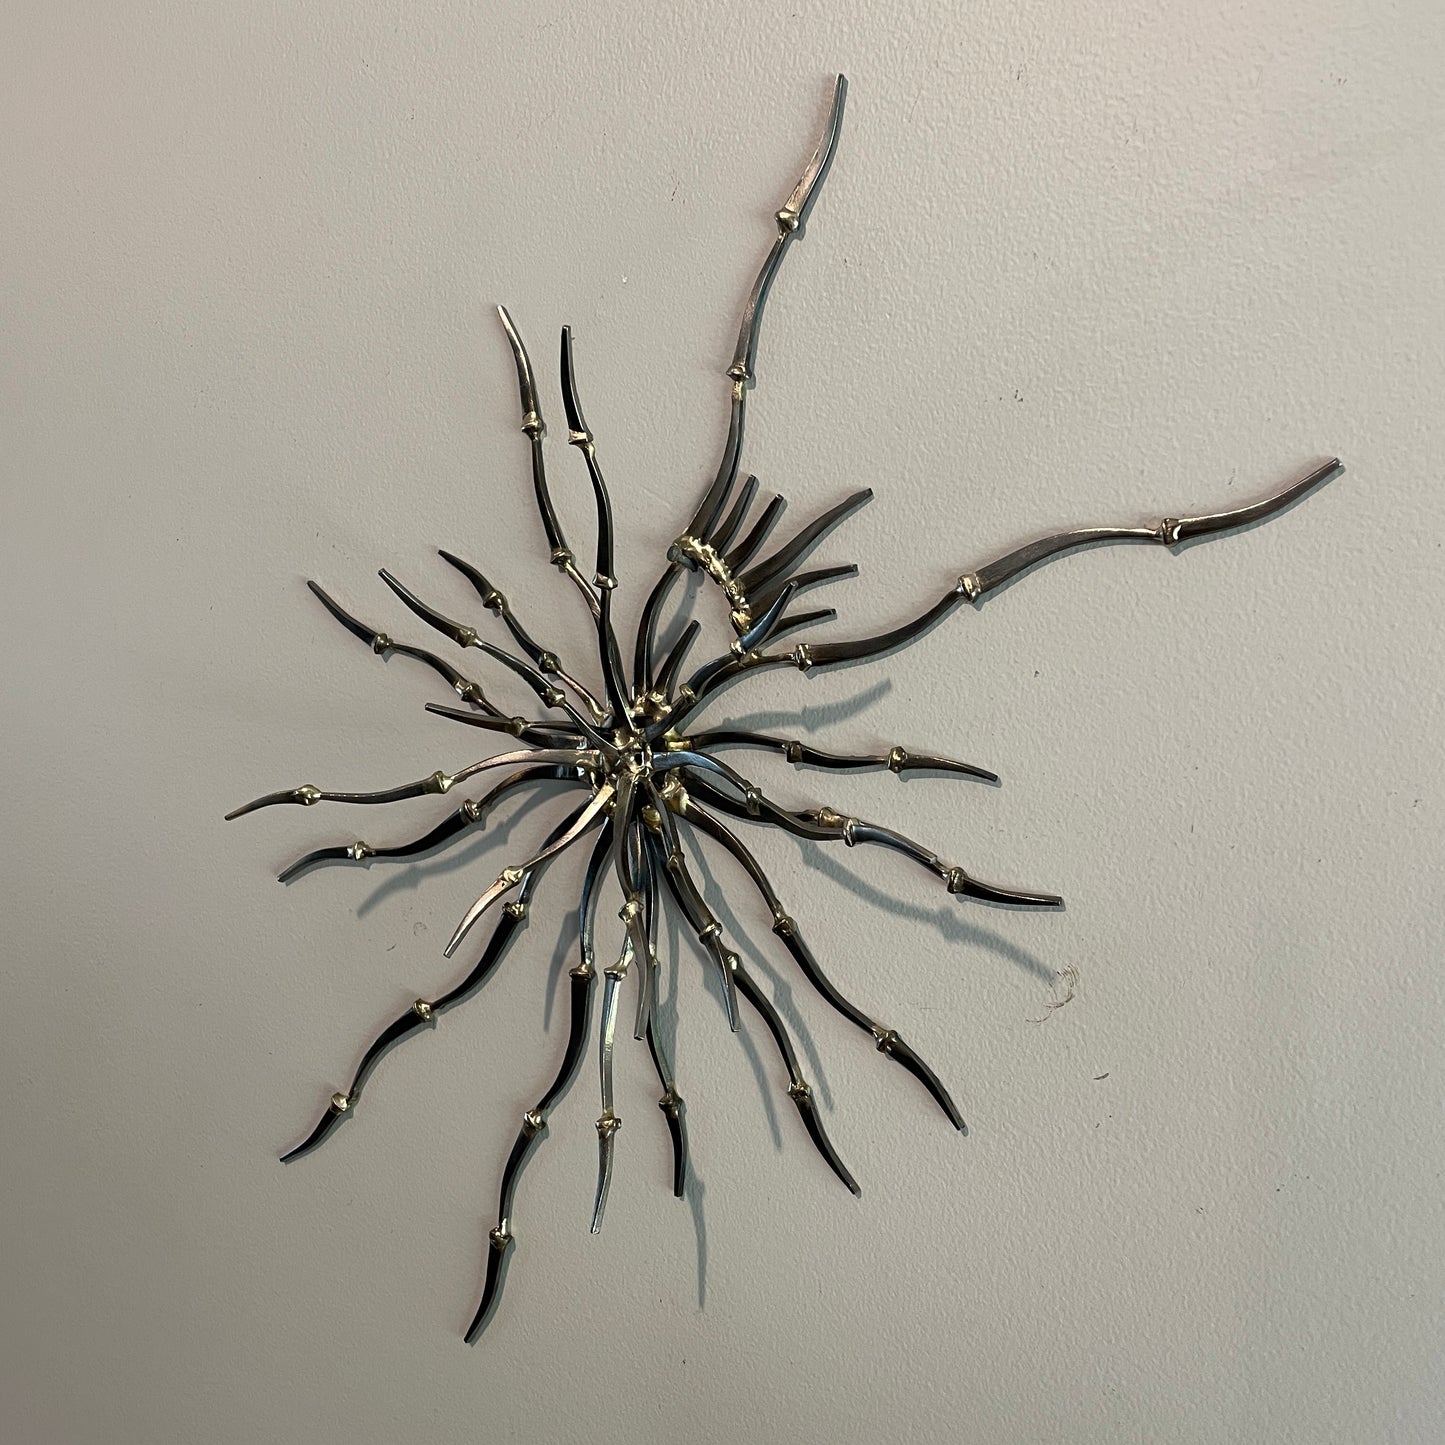 Medusa's Crown - #5 in a series - Brutalist Mid-Century style Metal Wall Sculpture